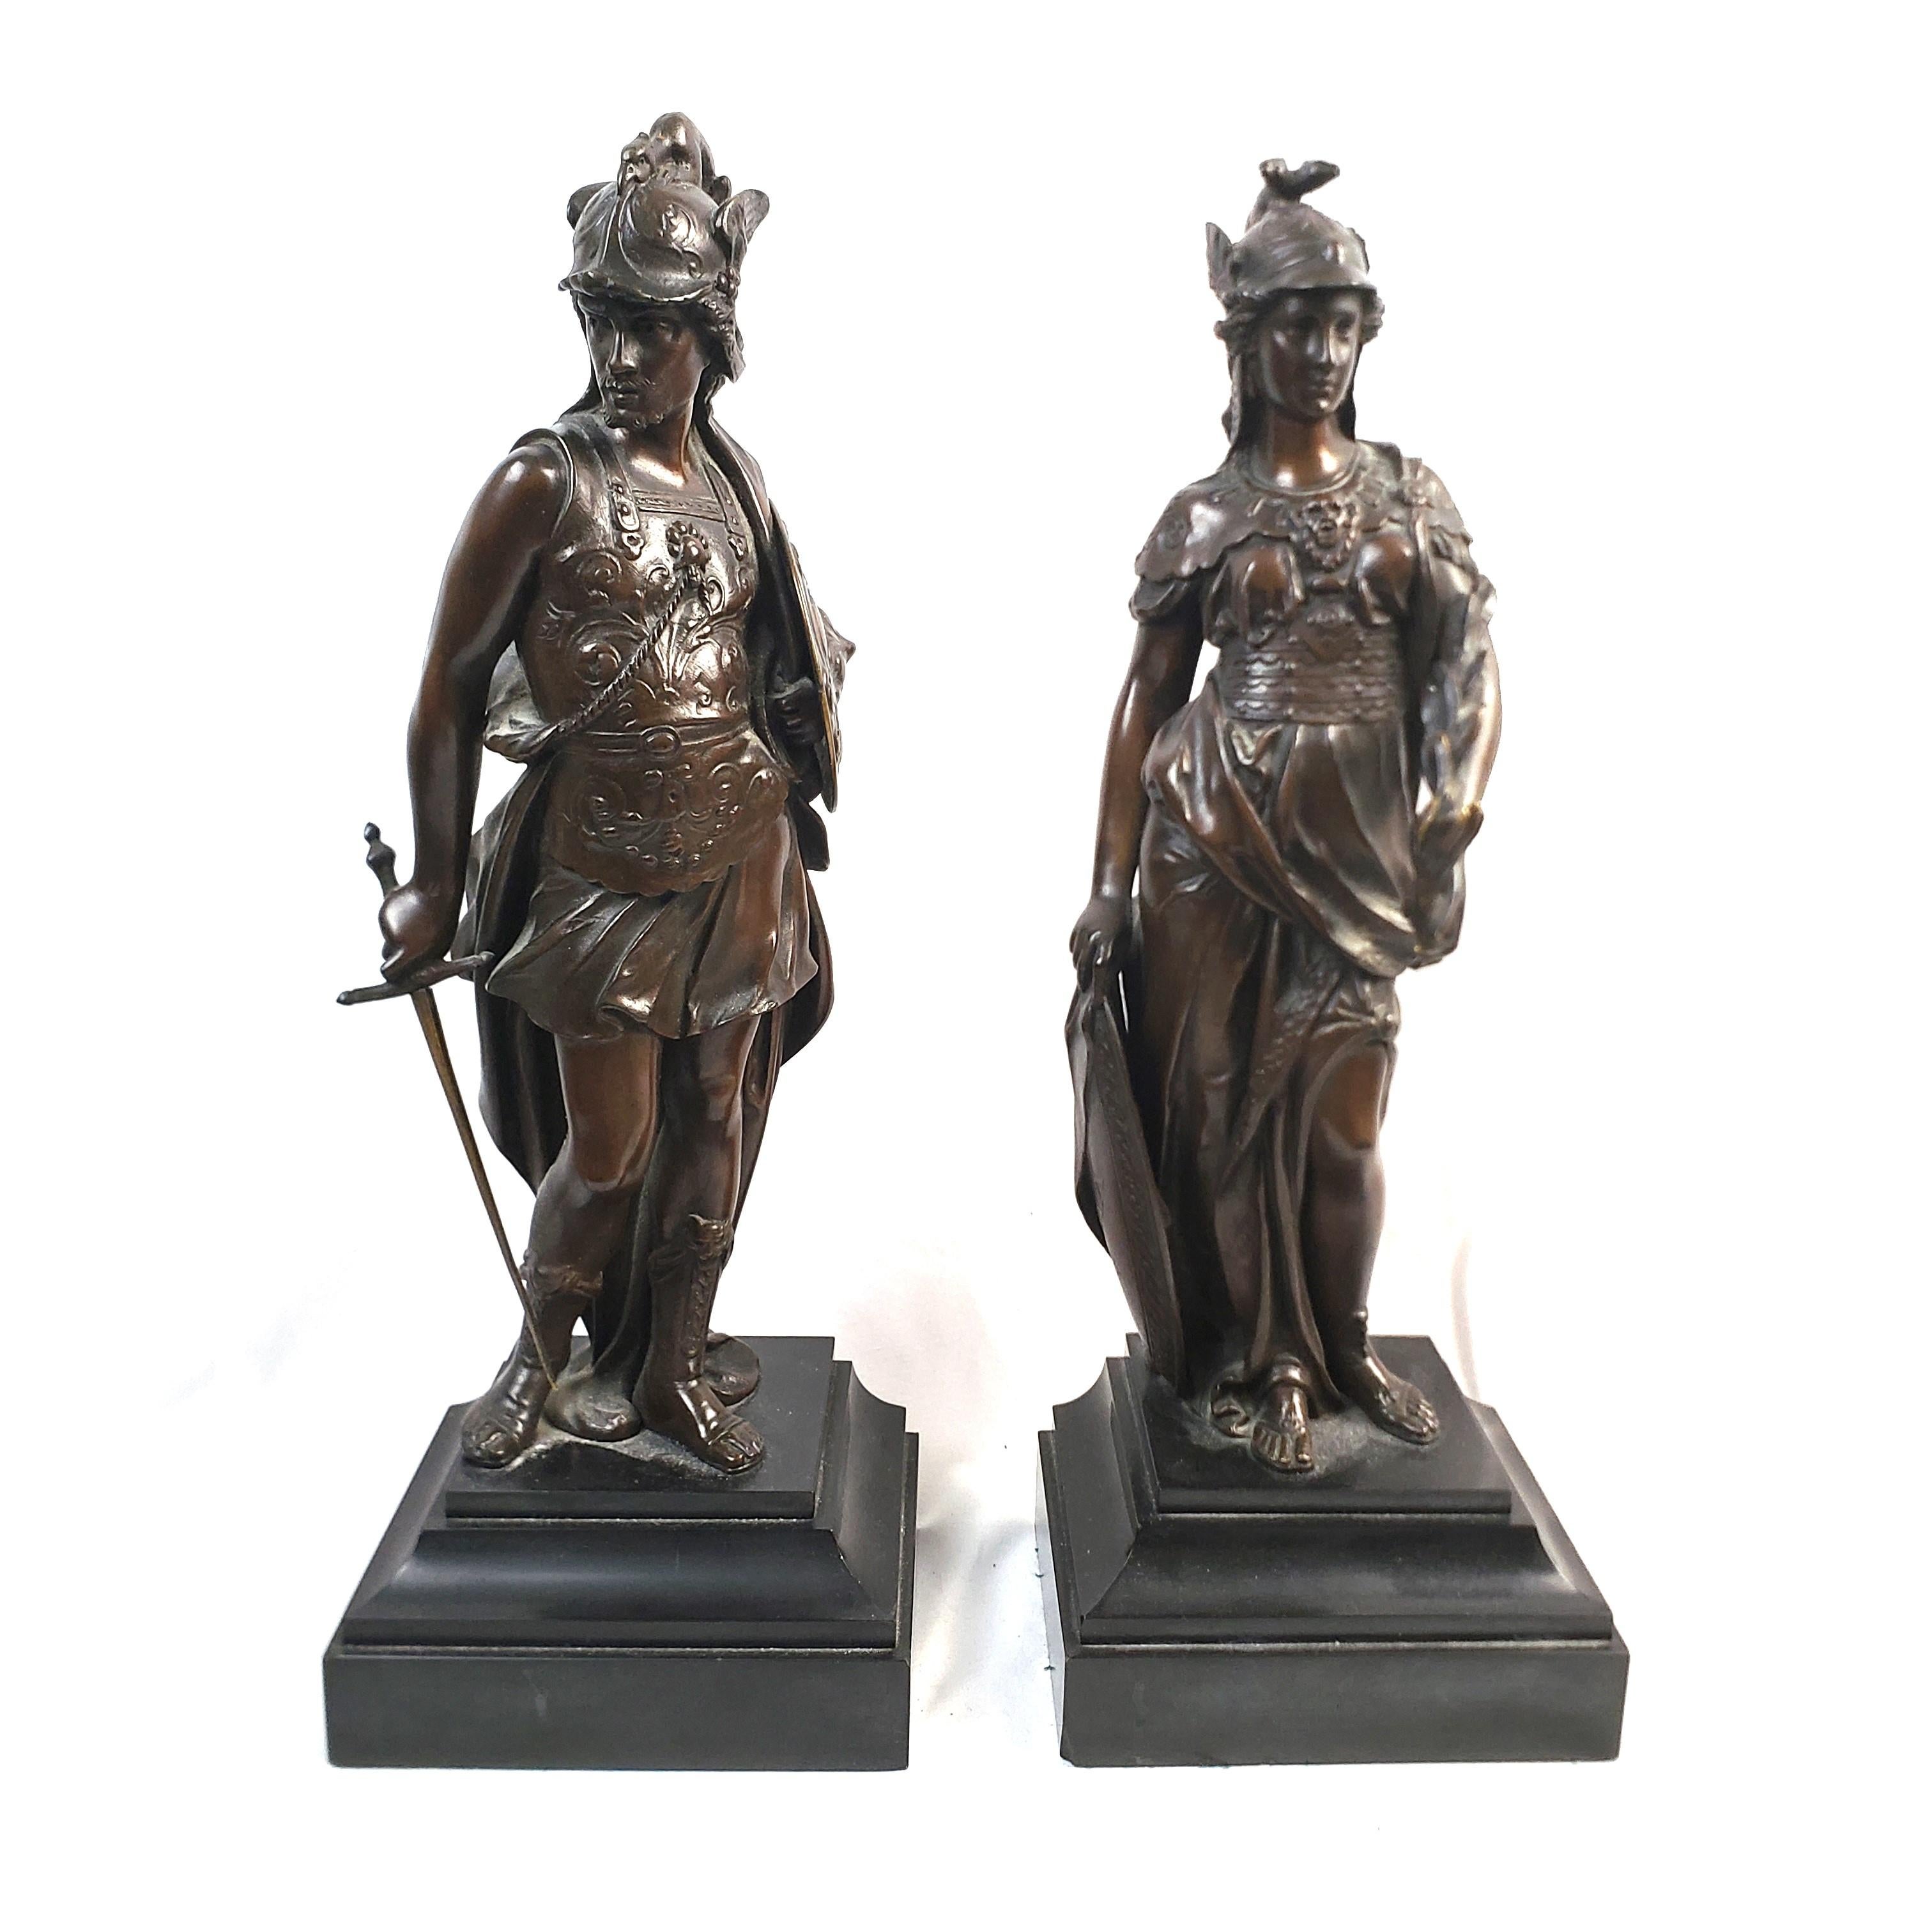 This pair of antique sculptures are unsigned, but presumed to have originated from France and date to approximately 1850 and done in a period Renaissance Revival style. The sculptures are composed of cast and patinated bronze and depict the two